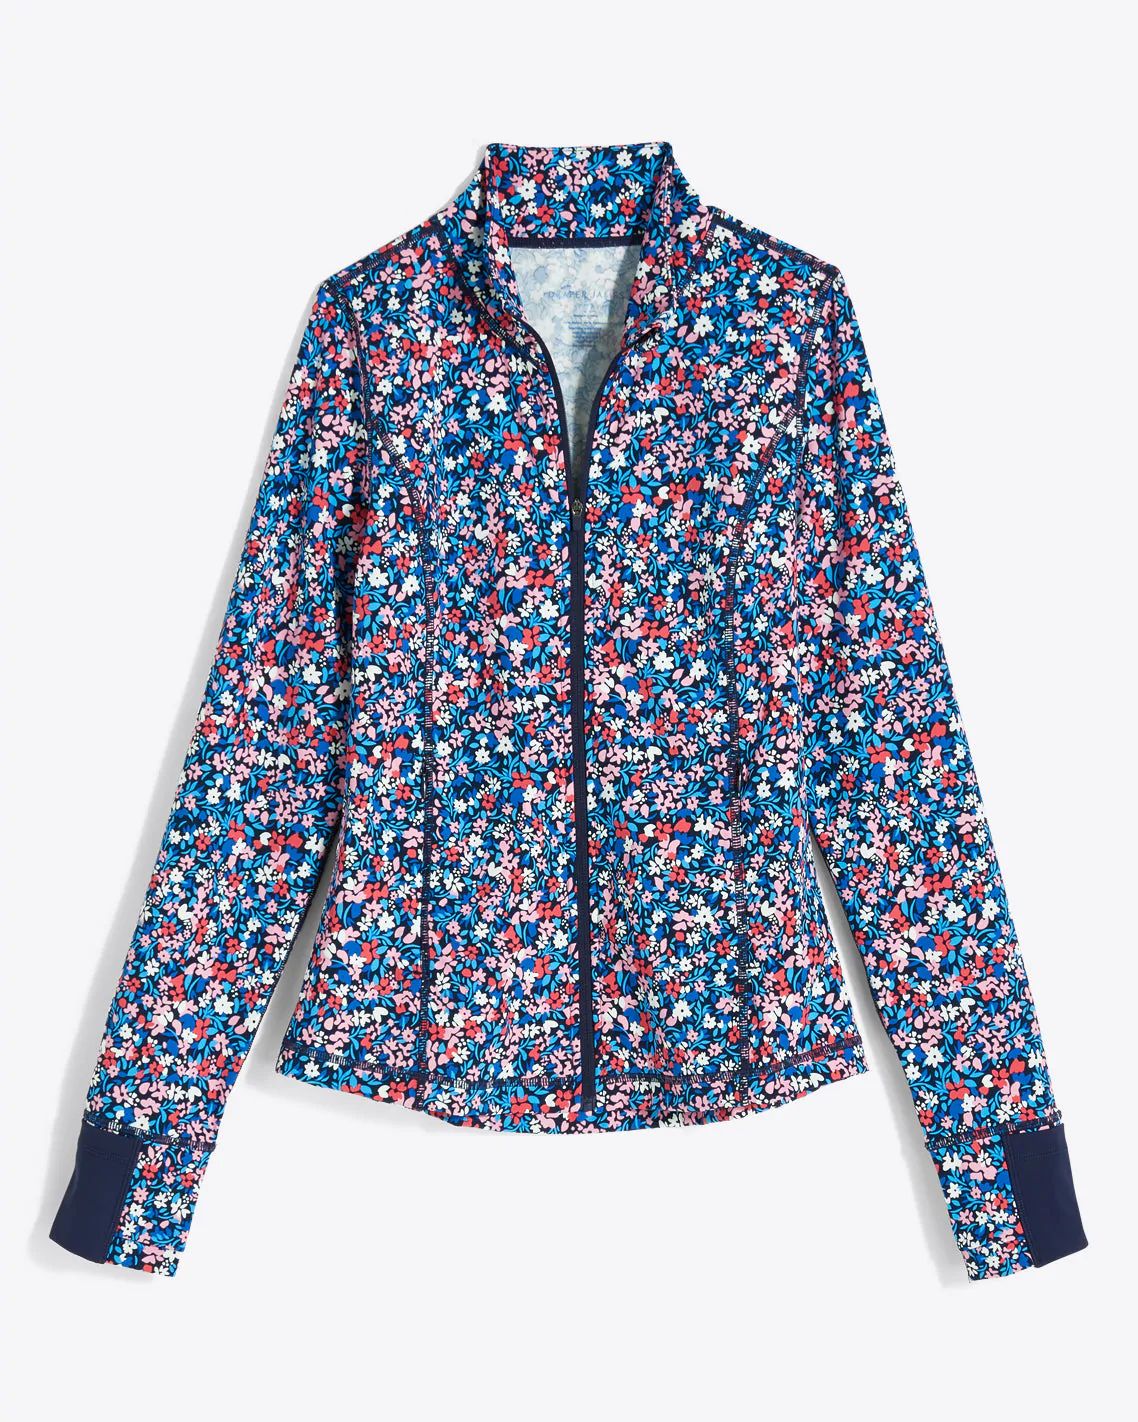 Warm Up Jacket in Allover Ditsy Floral | Draper James (US)